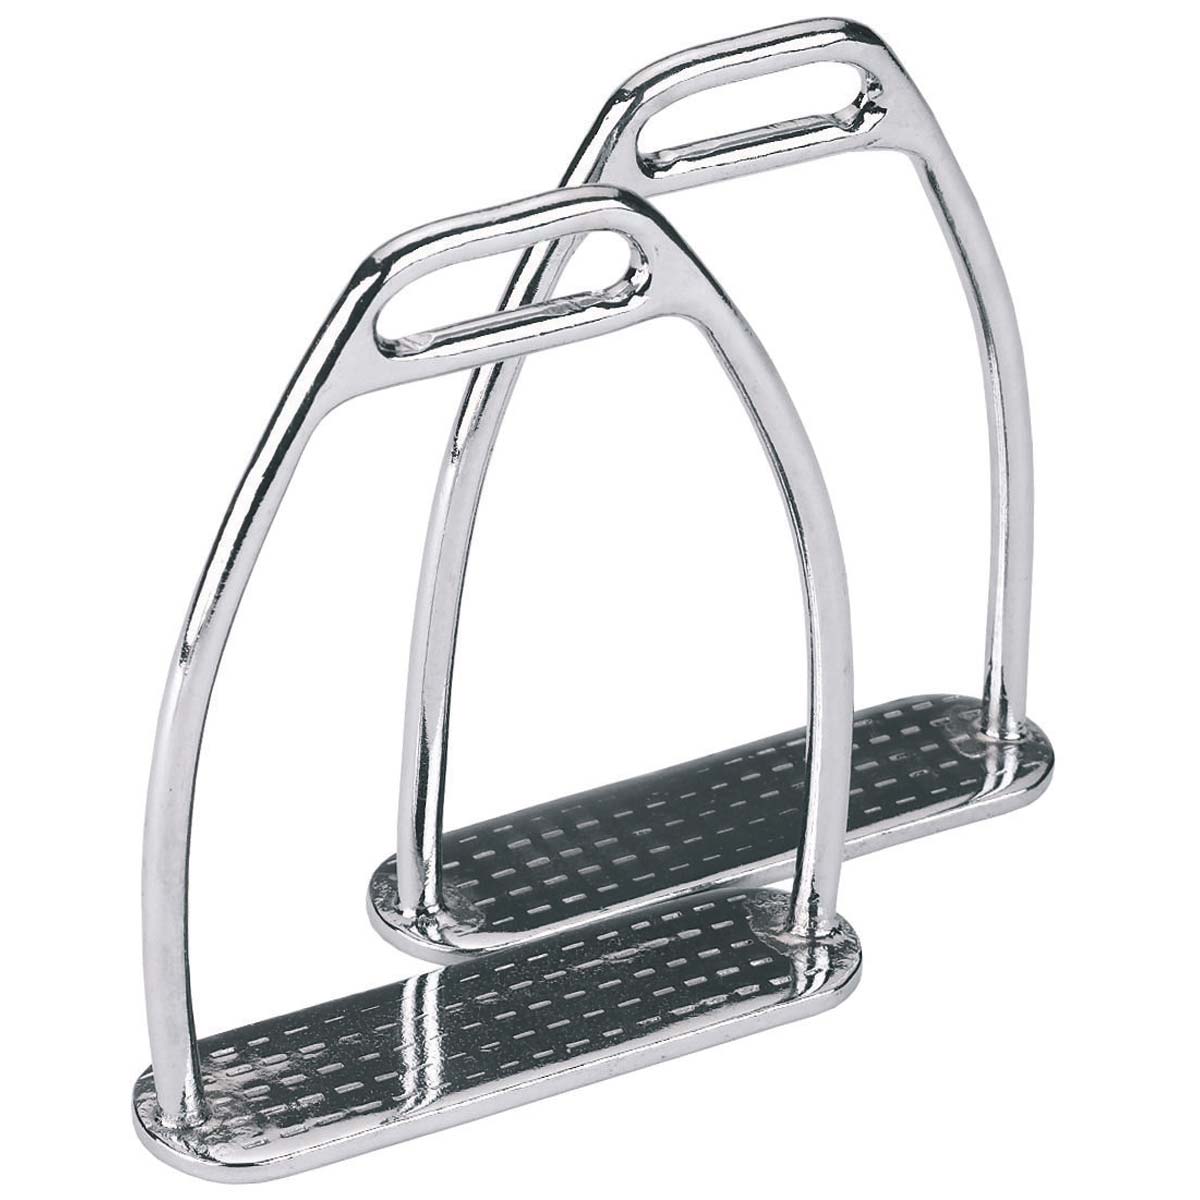 Stirrup for kids stainless steel